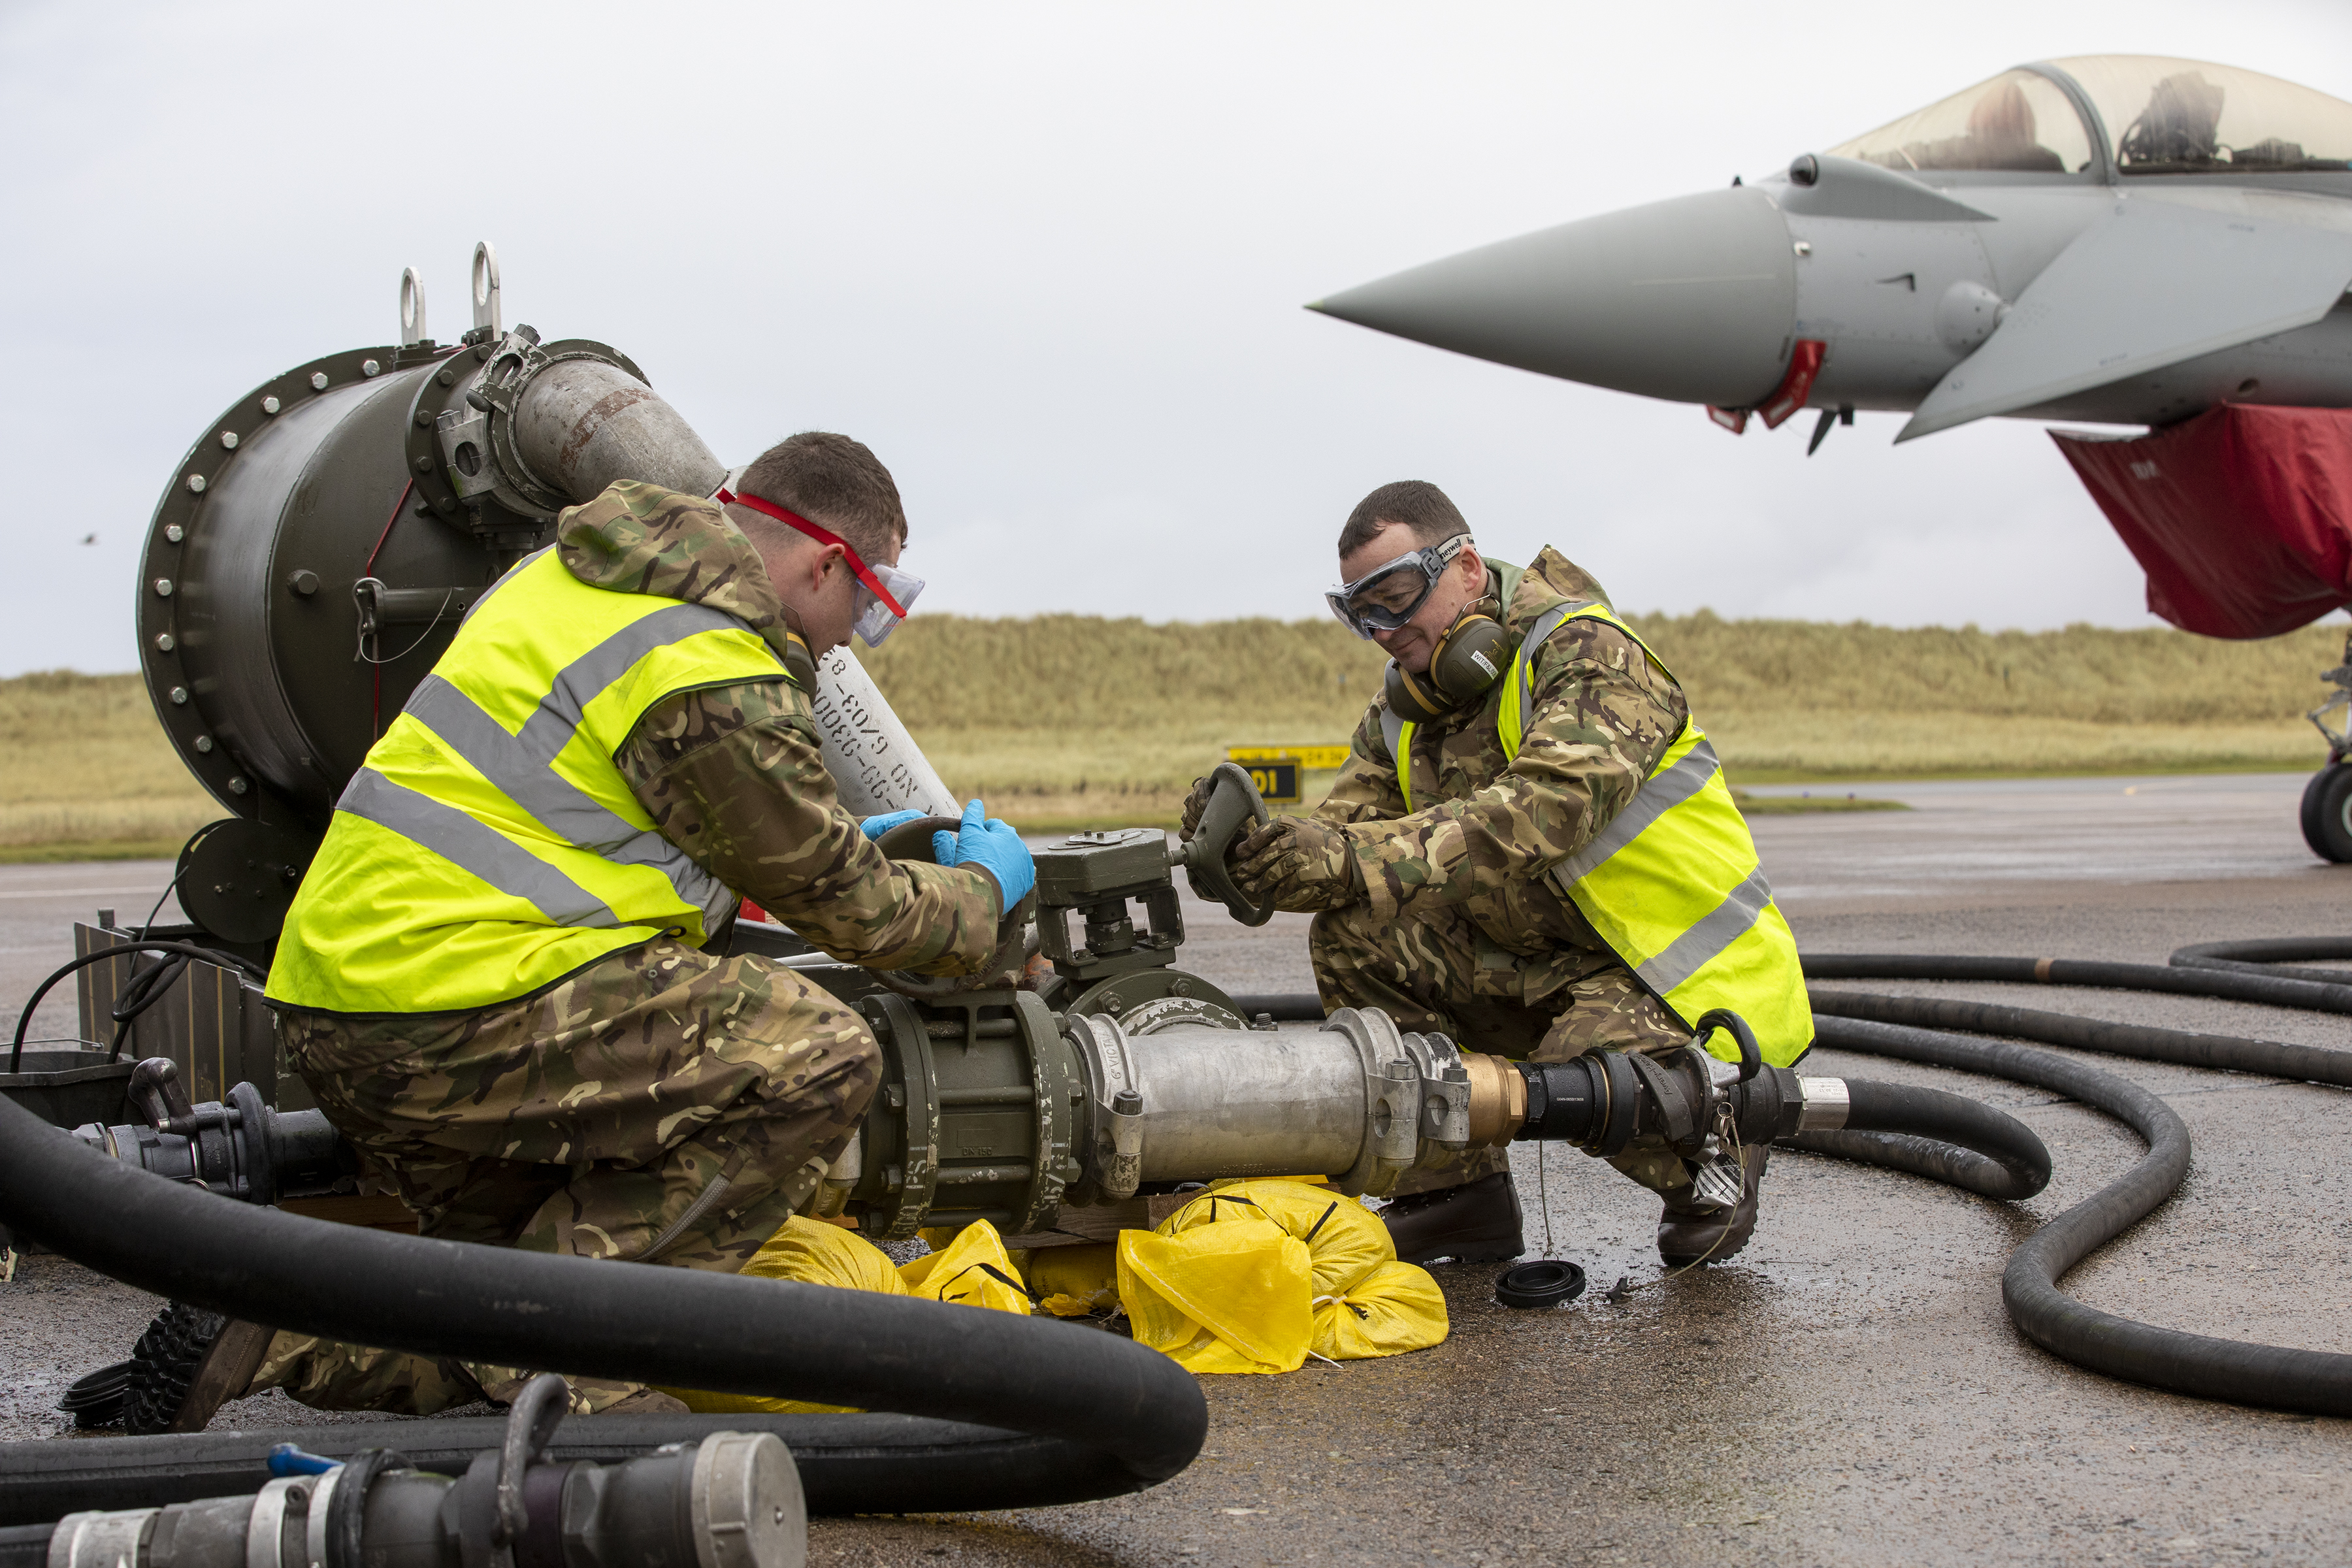 Personnel work on aircraft parts, with Typhoon in the background.